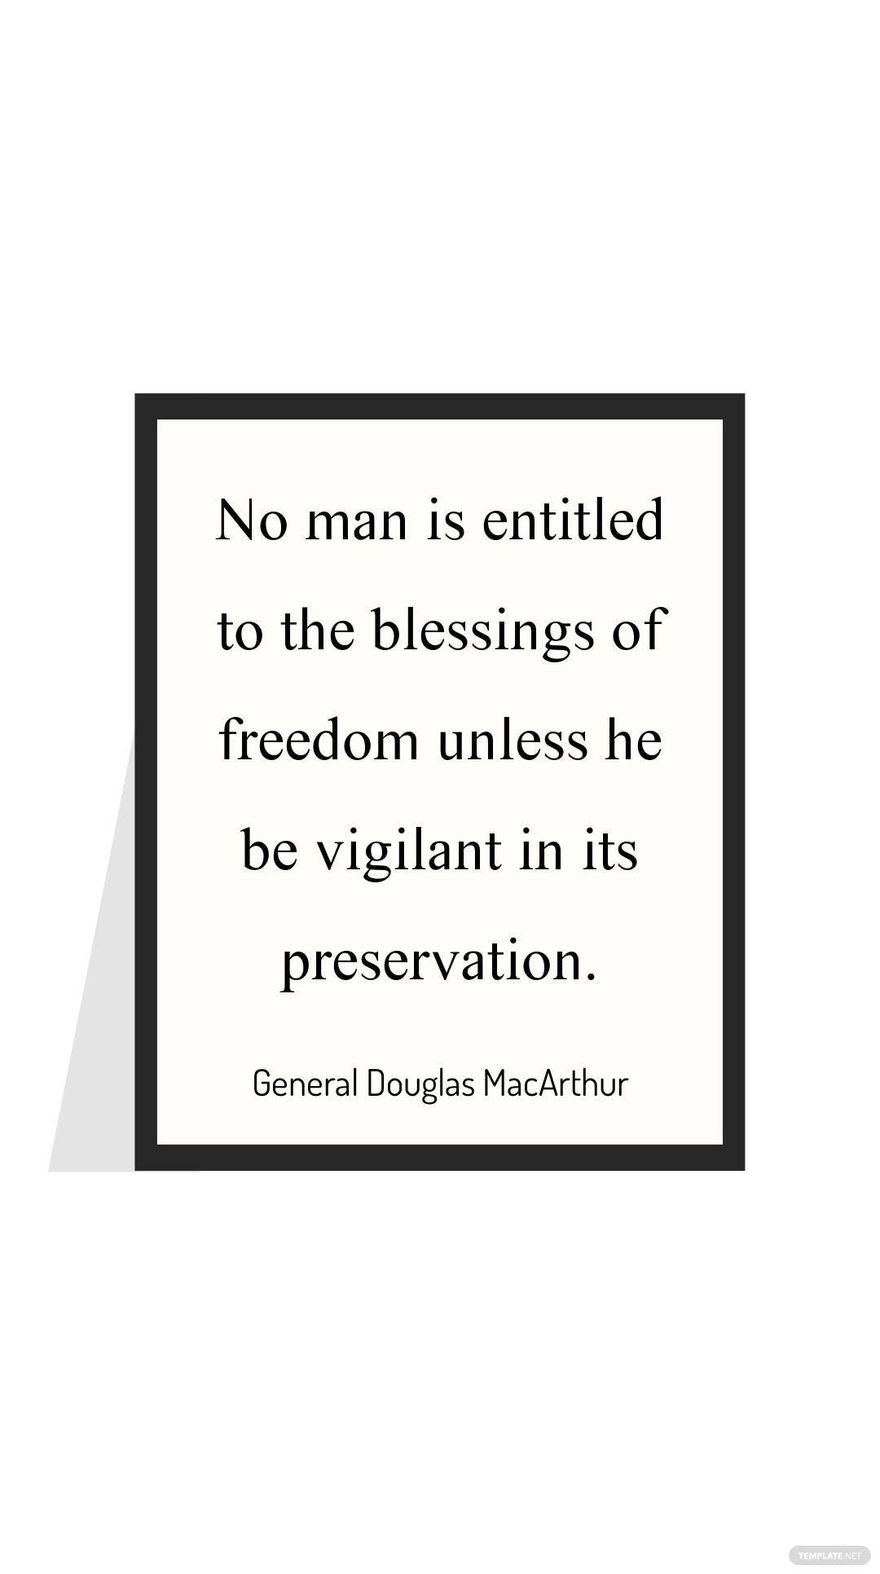 General Douglas MacArthur - No man is entitled to the blessings of freedom unless he be vigilant in its preservation.